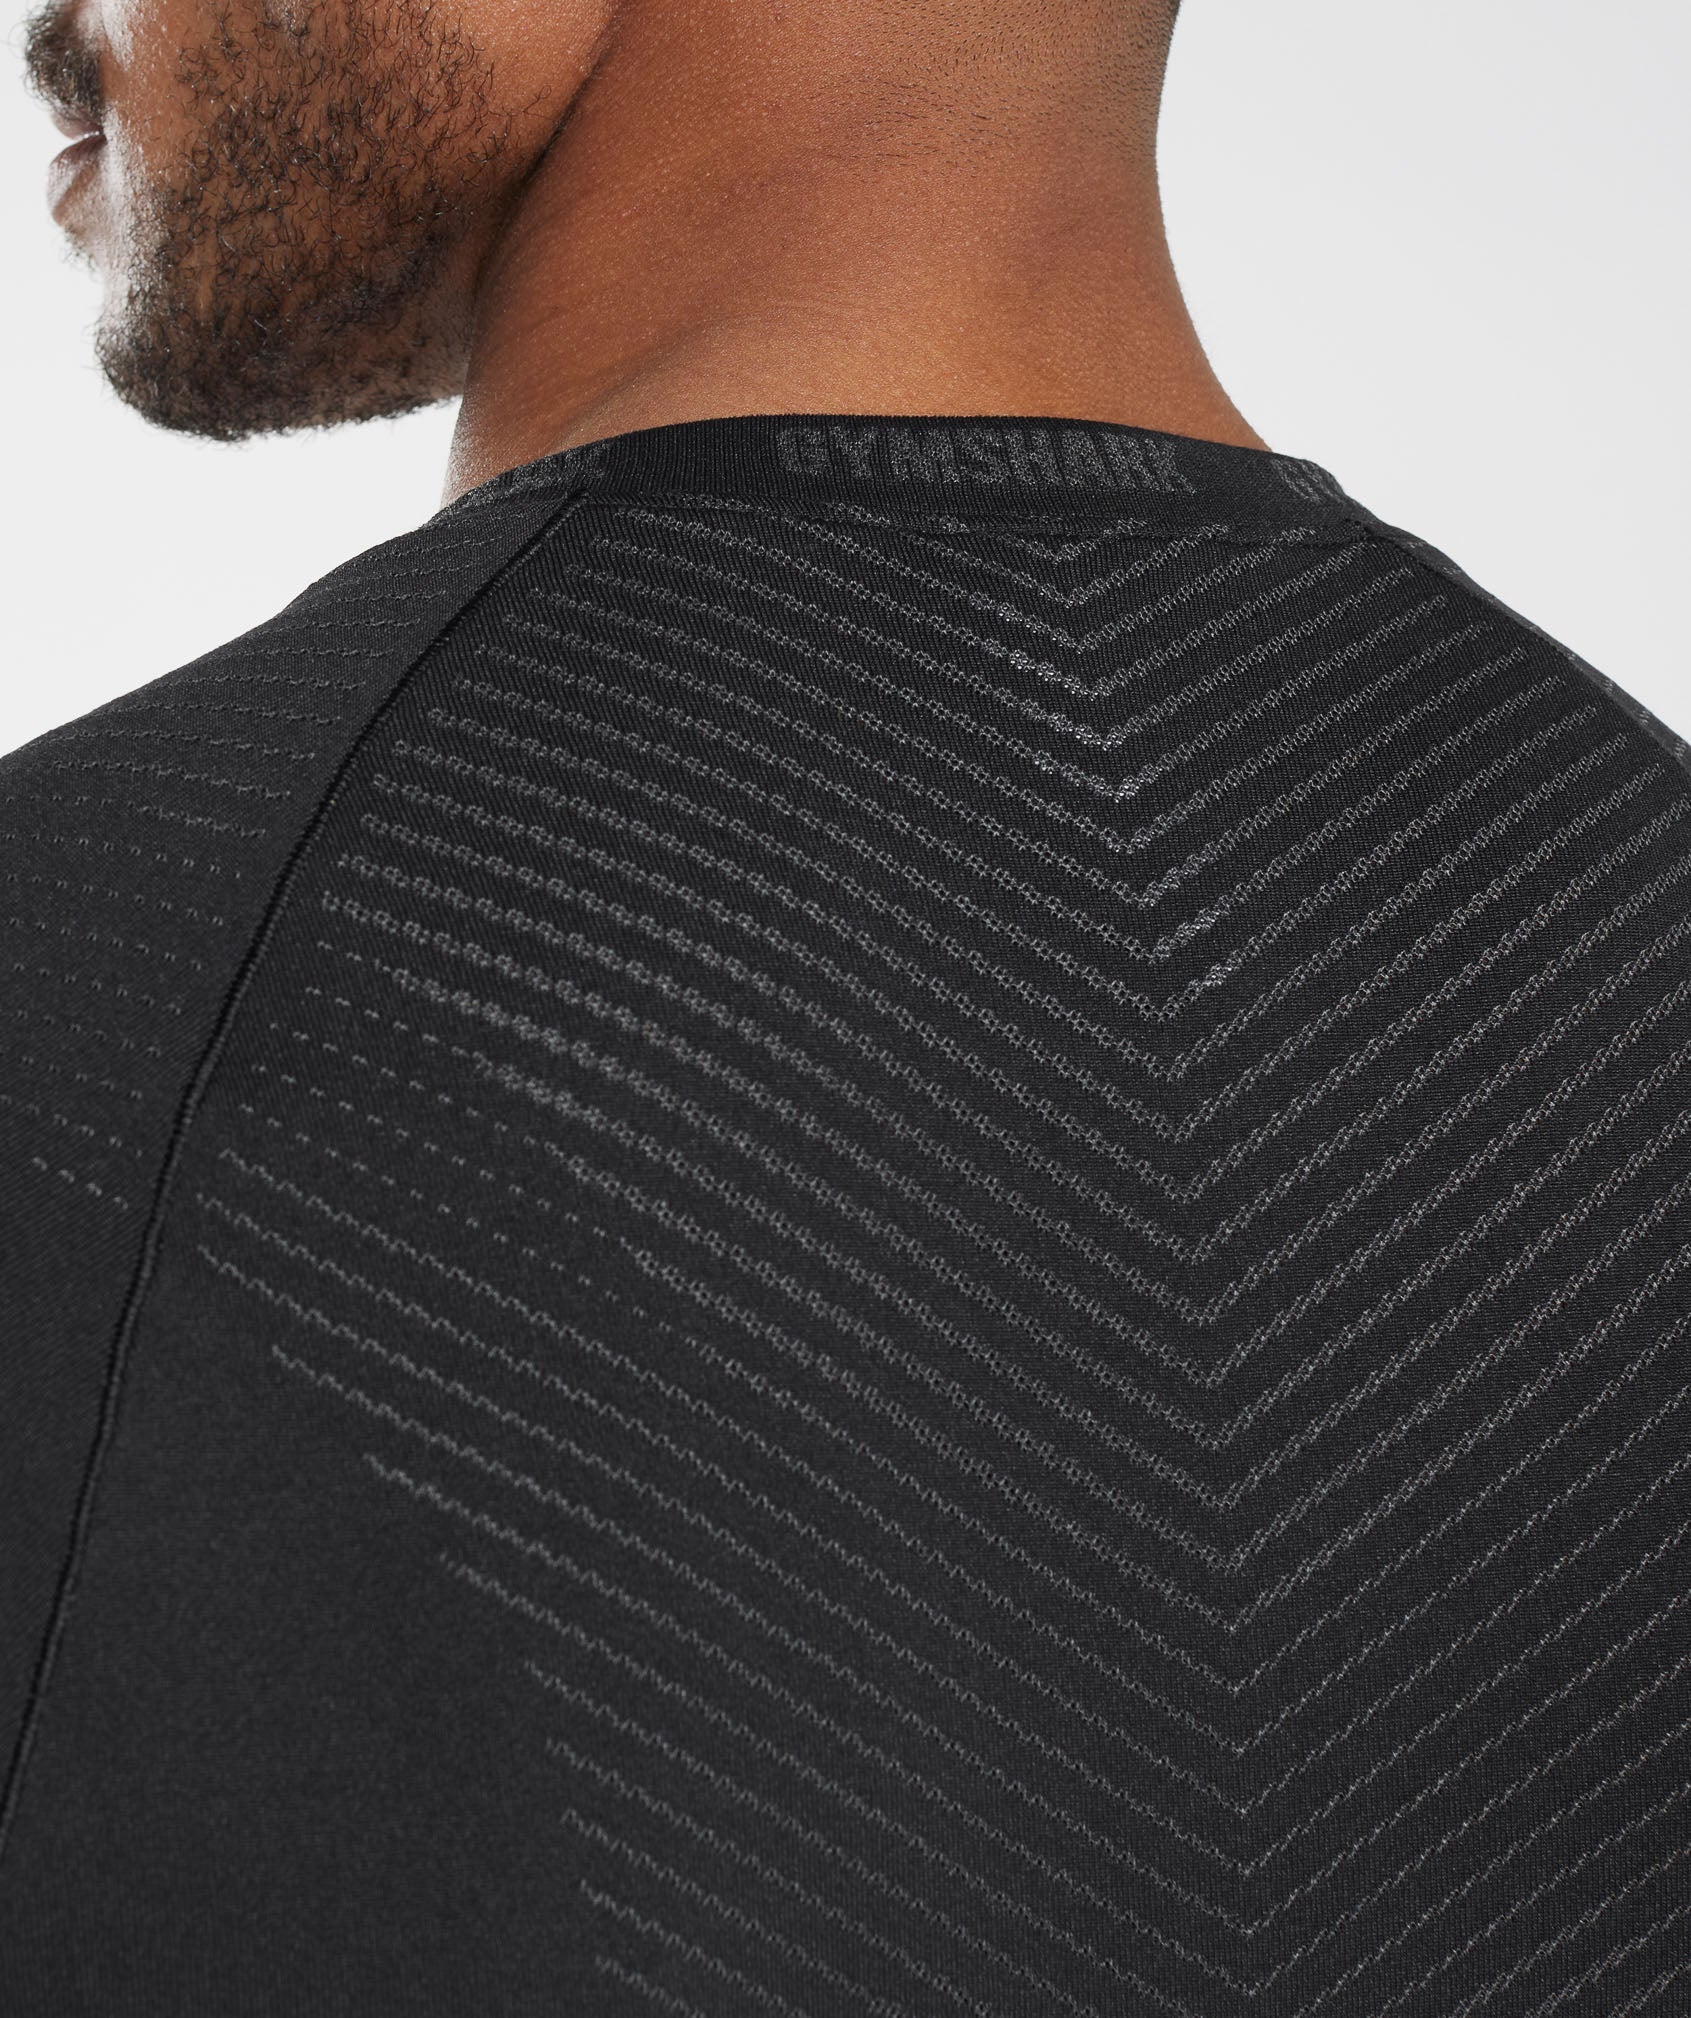 Apex Seamless T-Shirt in Black/Silhouette Grey - view 6